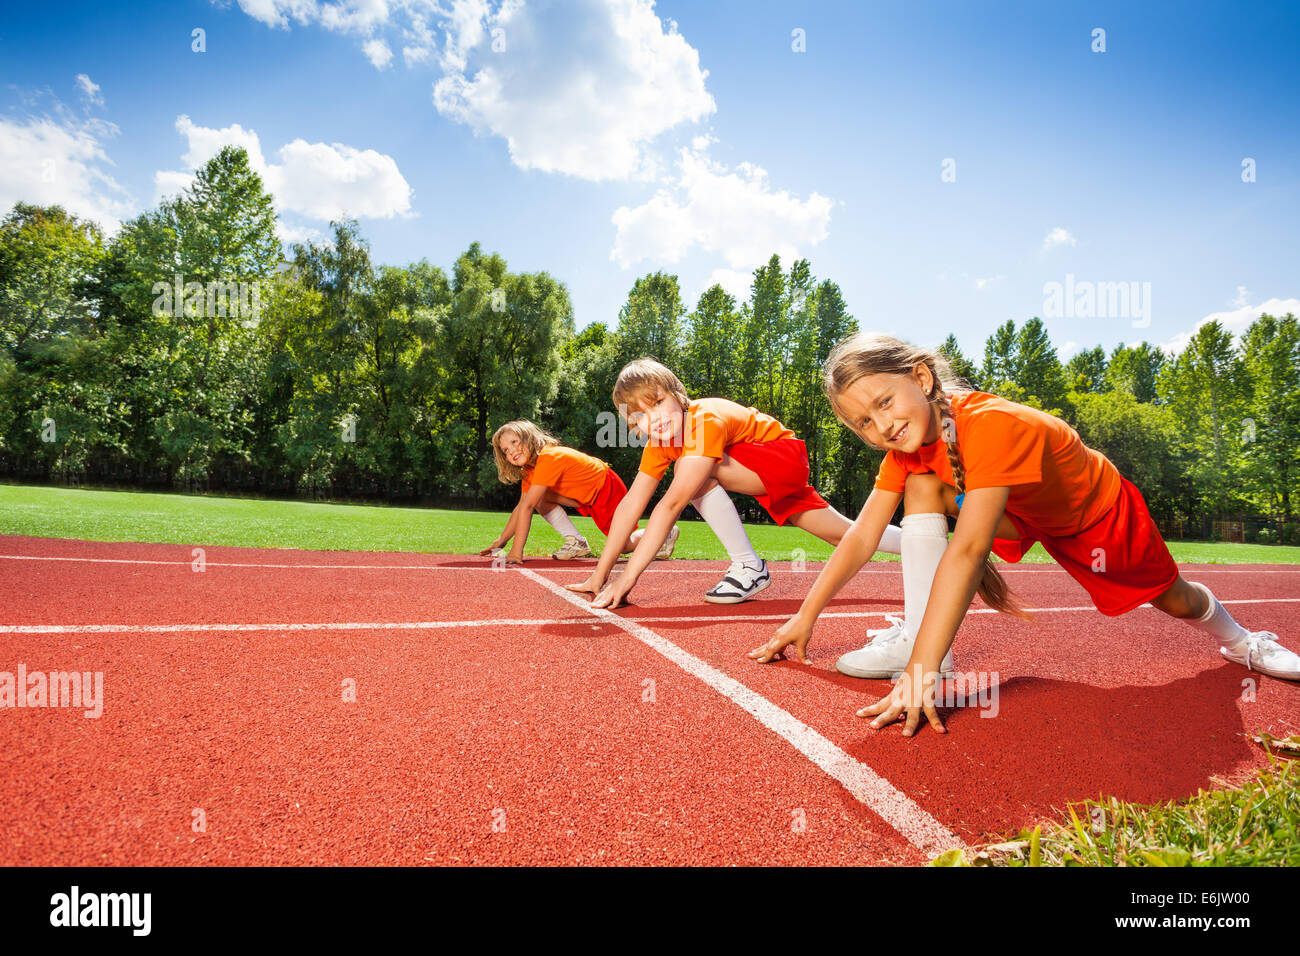 Children on bending knees in row ready to run Stock Photo